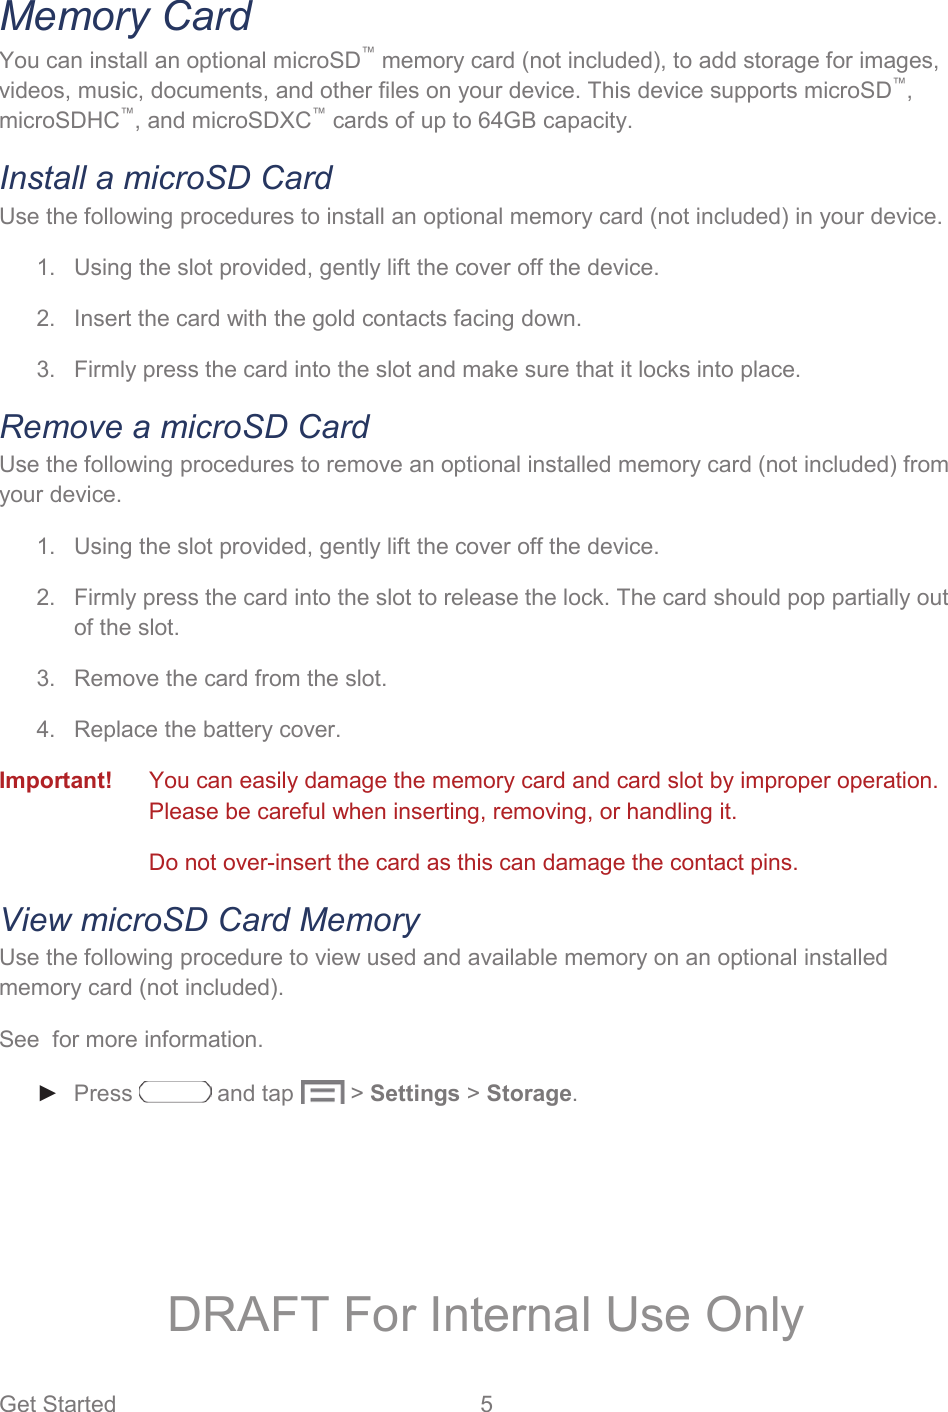 Get Started  5   Memory Card You can install an optional microSD™ memory card (not included), to add storage for images, videos, music, documents, and other files on your device. This device supports microSD™, microSDHC™, and microSDXC™ cards of up to 64GB capacity. Install a microSD Card Use the following procedures to install an optional memory card (not included) in your device. 1.  Using the slot provided, gently lift the cover off the device. 2.  Insert the card with the gold contacts facing down. 3.  Firmly press the card into the slot and make sure that it locks into place.  Remove a microSD Card Use the following procedures to remove an optional installed memory card (not included) from your device. 1.  Using the slot provided, gently lift the cover off the device. 2.  Firmly press the card into the slot to release the lock. The card should pop partially out of the slot. 3.  Remove the card from the slot. 4.  Replace the battery cover. Important!   You can easily damage the memory card and card slot by improper operation. Please be careful when inserting, removing, or handling it.  Do not over-insert the card as this can damage the contact pins. View microSD Card Memory Use the following procedure to view used and available memory on an optional installed memory card (not included).  See  for more information. ► Press   and tap   &gt; Settings &gt; Storage.  DRAFT For Internal Use Only